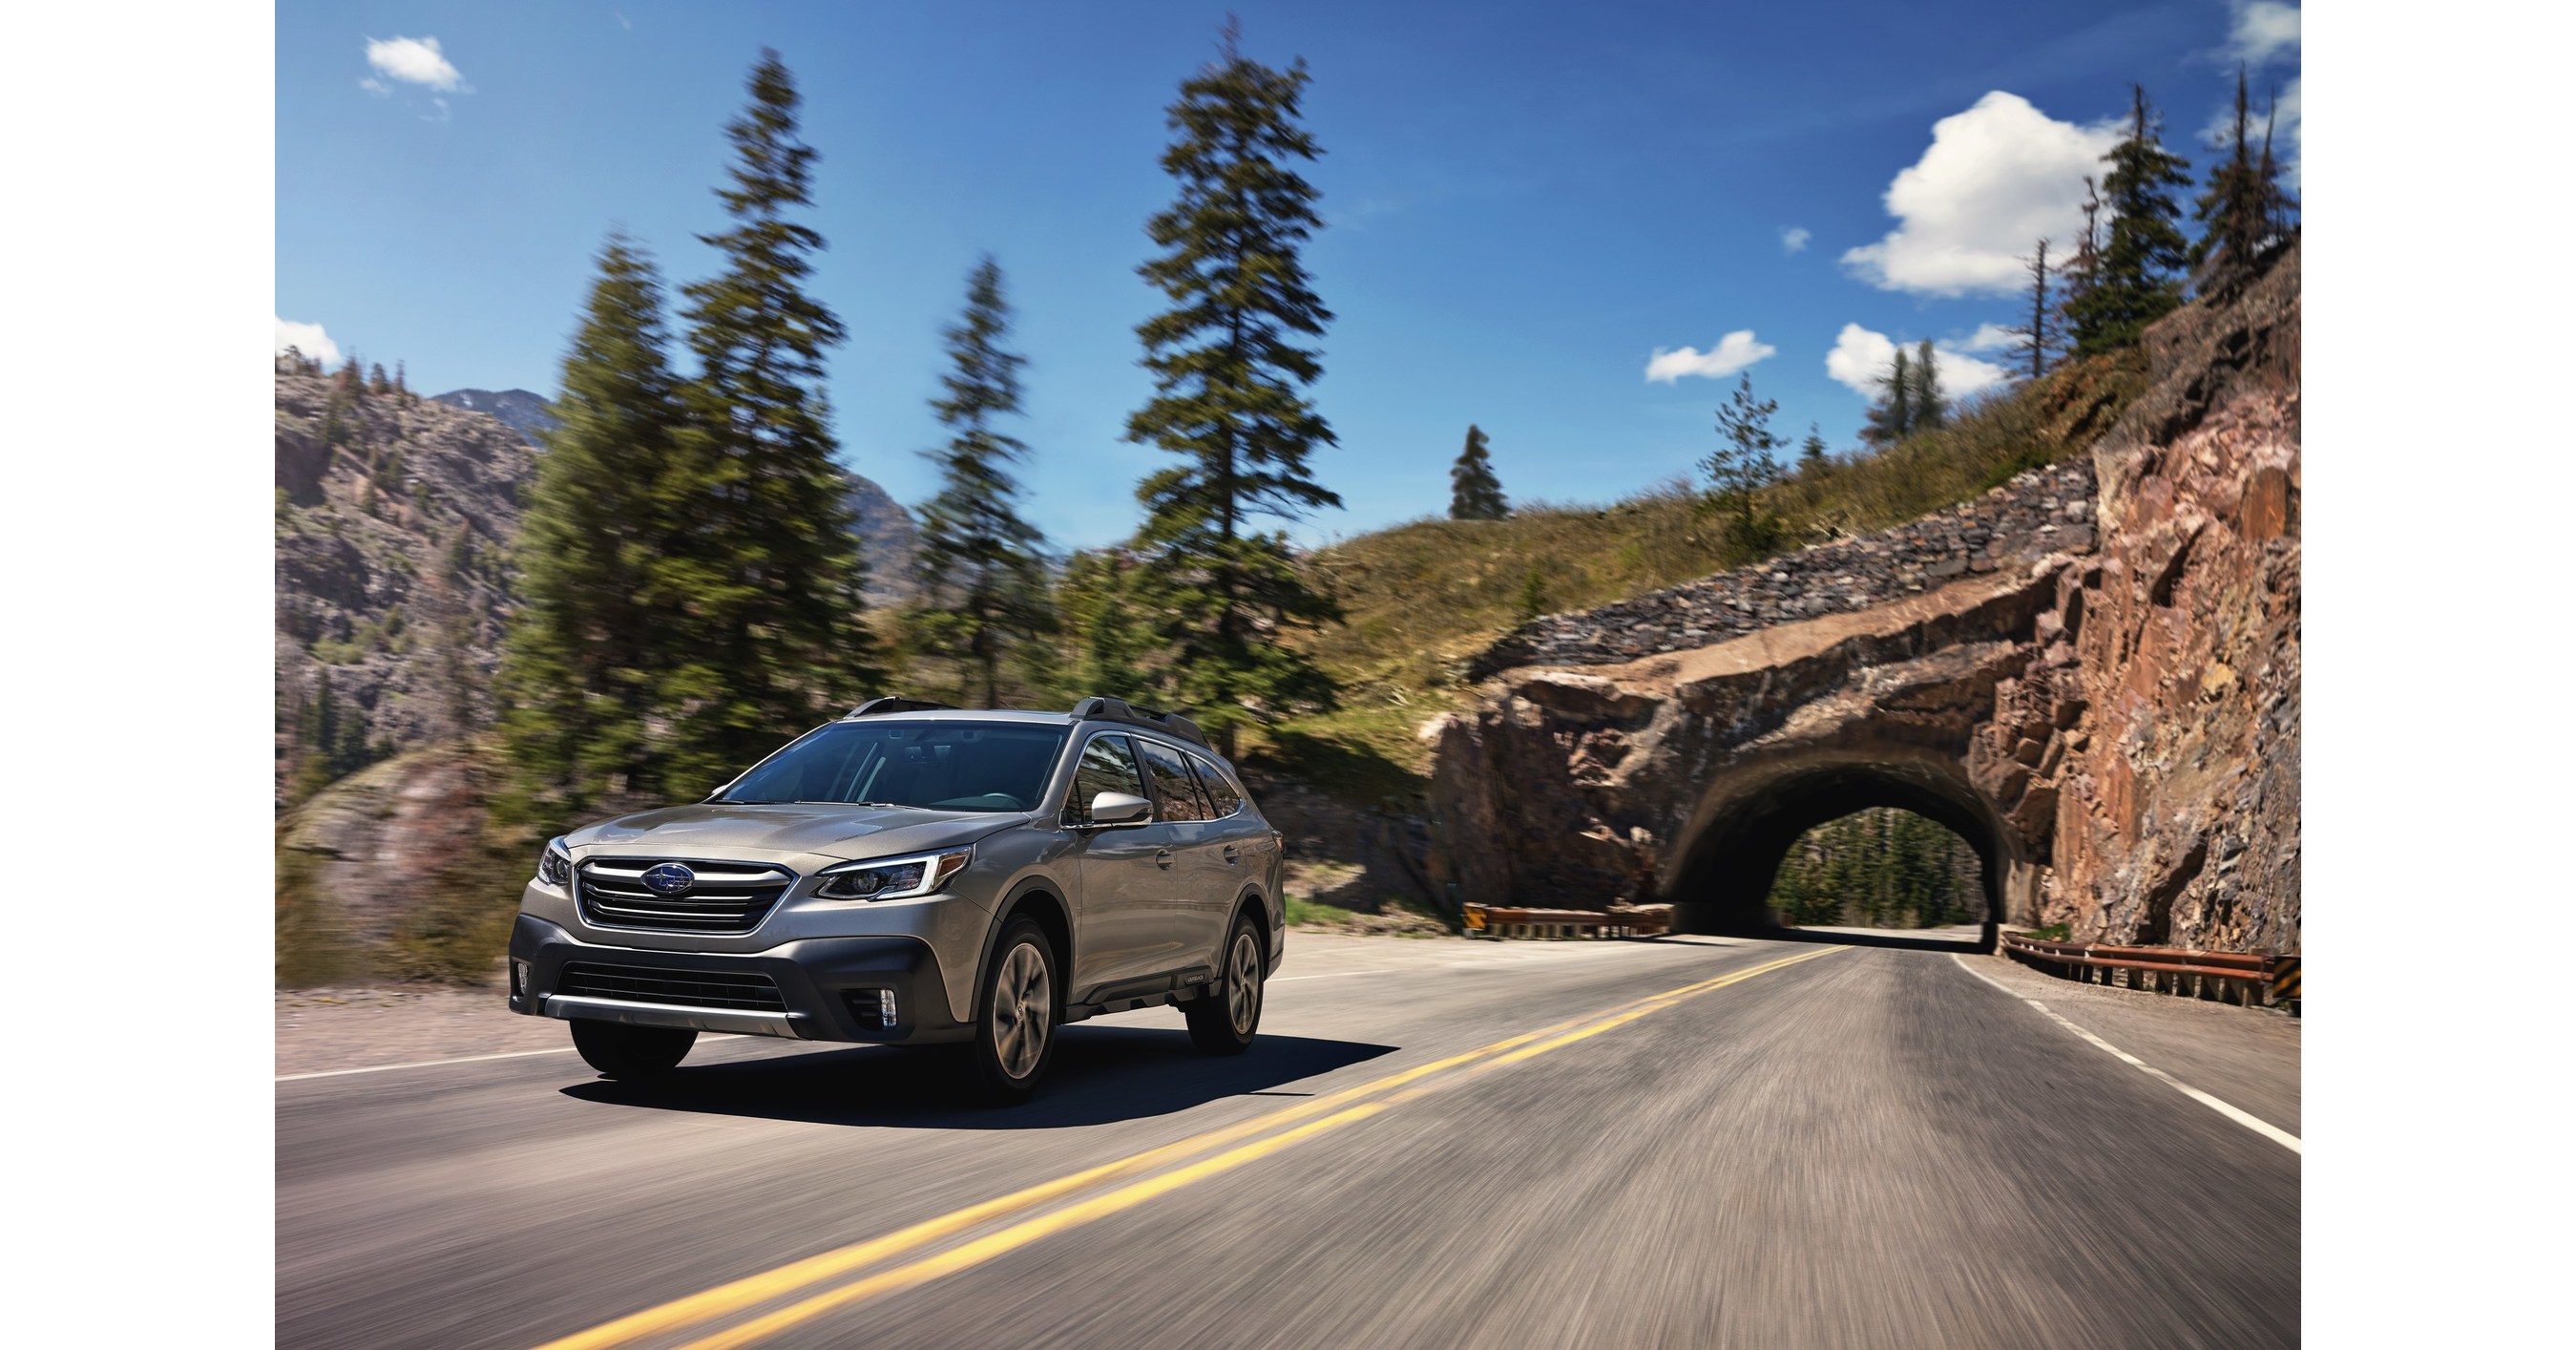 Subaru Announces Pricing For Legacy 2020 Outback And Models